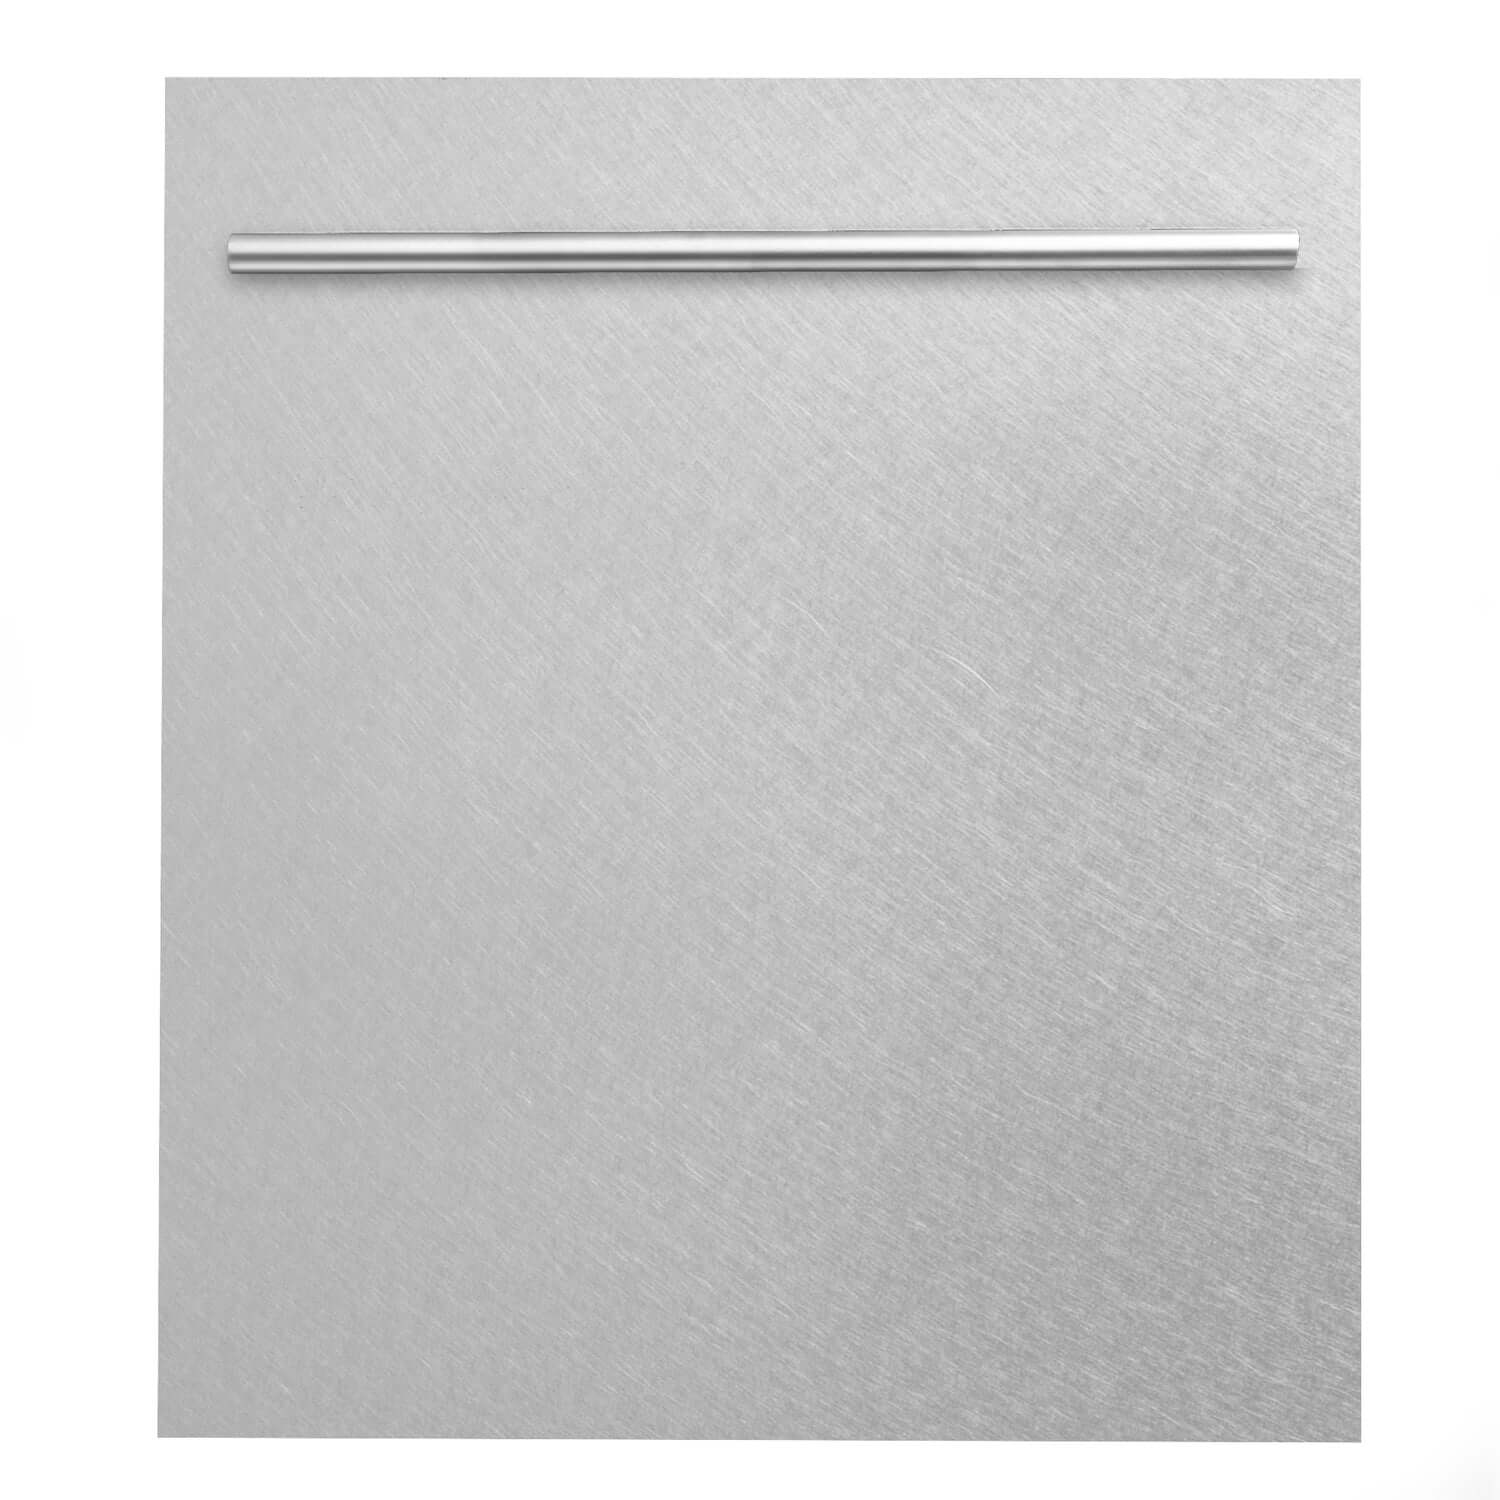 ZLINE 24 in. Fingerprint Resistant Top Control Built-In Dishwasher with Stainless Steel Tub and Modern Style Handle, 52dBa (DW-SN-24) front, closed.